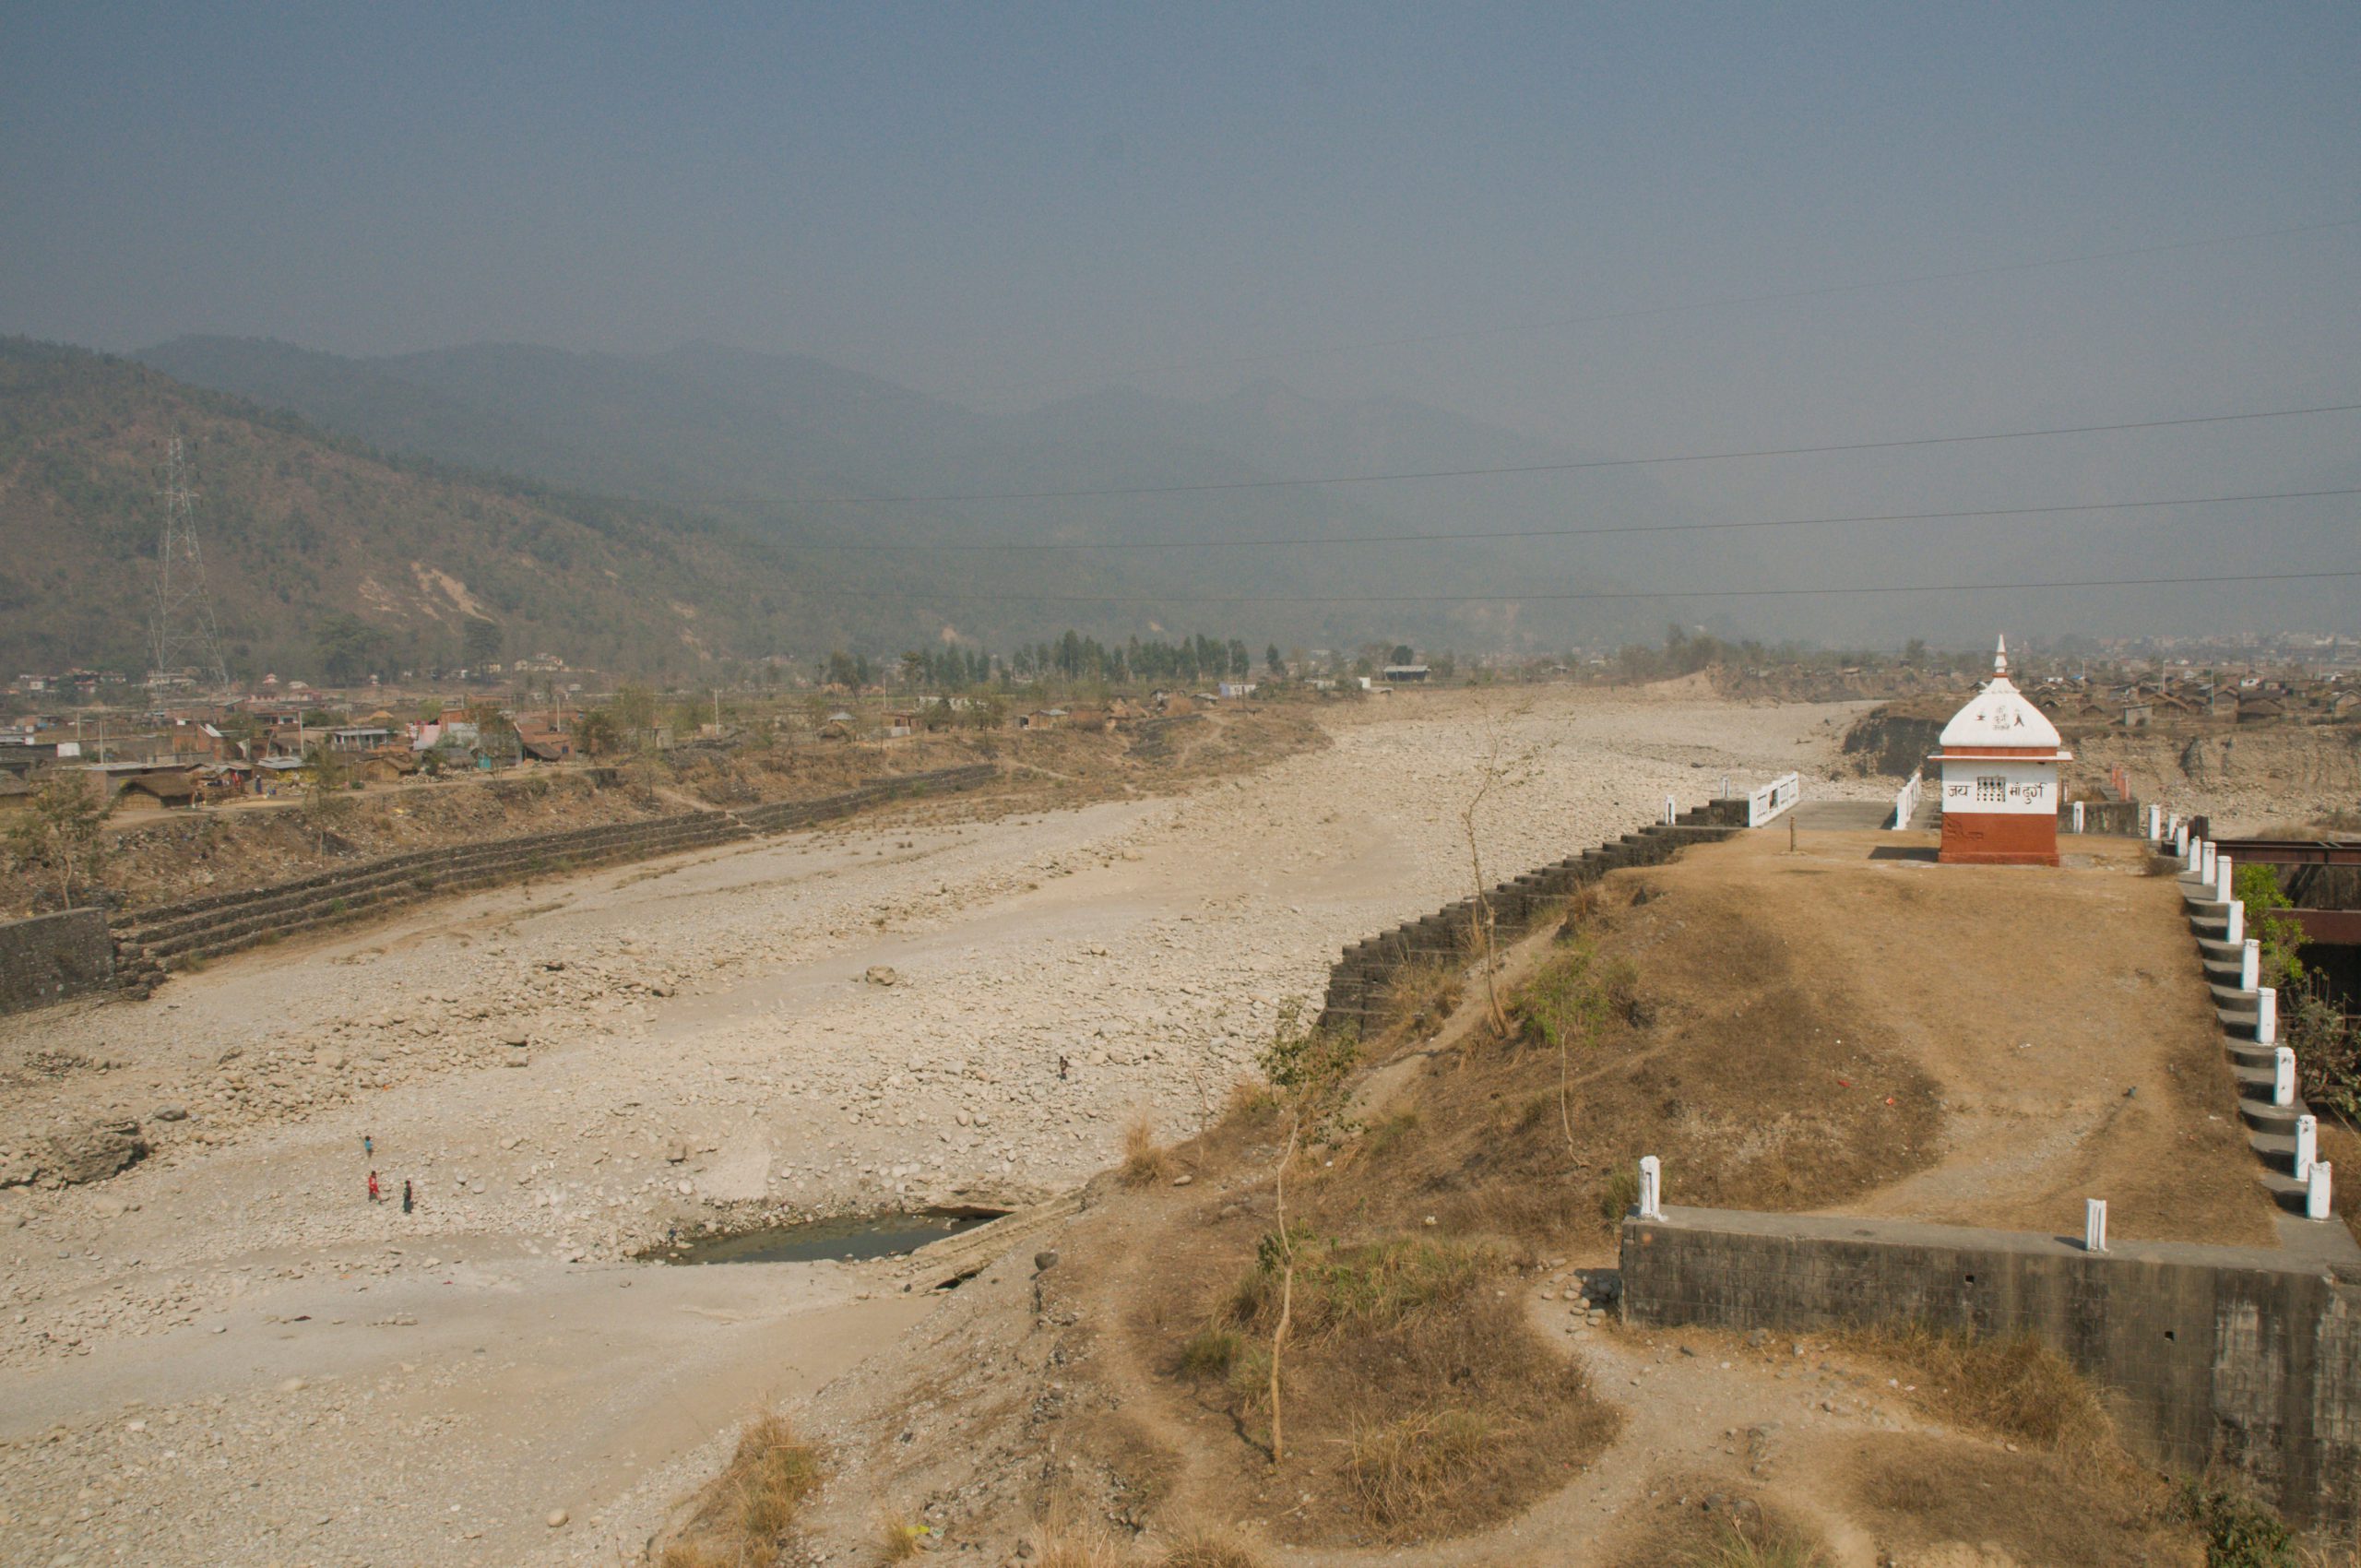 views of the town of Butwal, Nepal